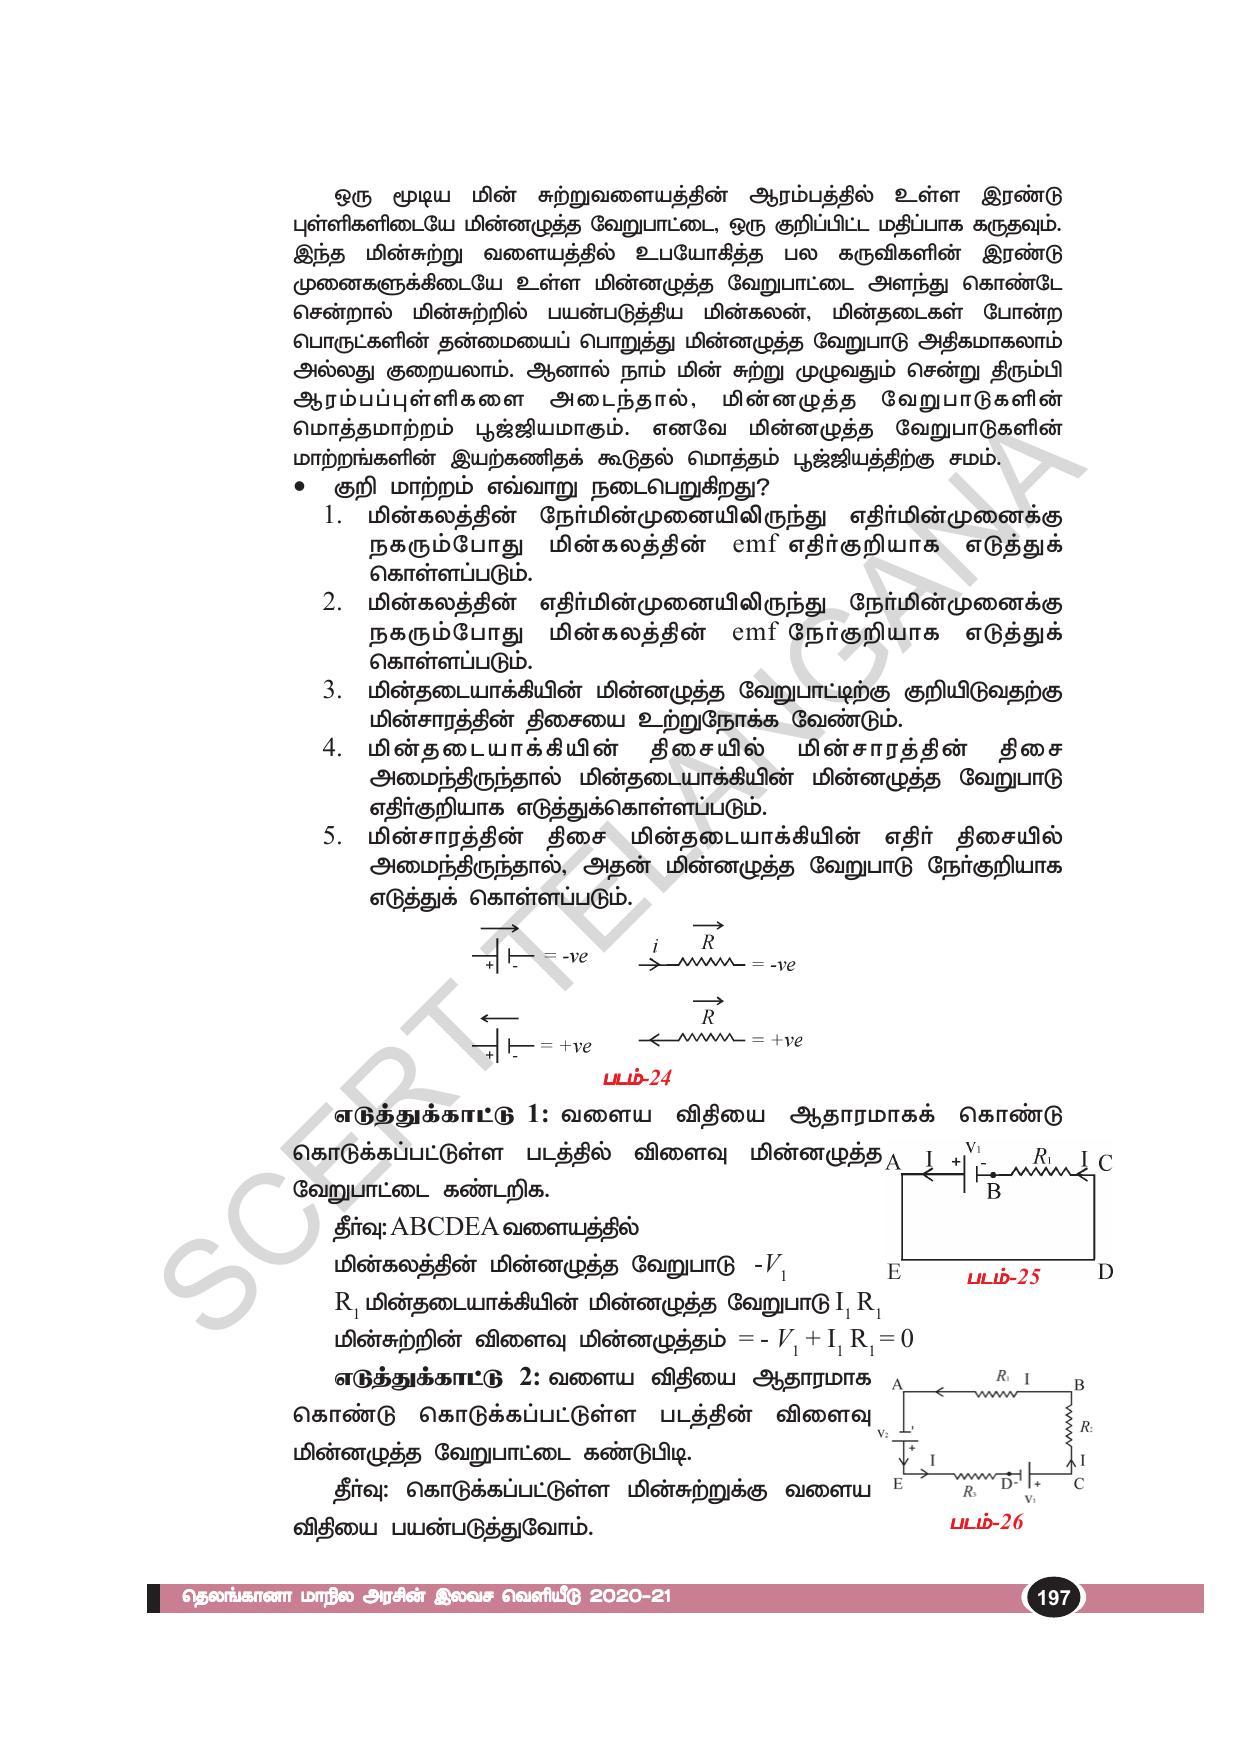 TS SCERT Class 10 Physical Science(Tamil Medium) Text Book - Page 209